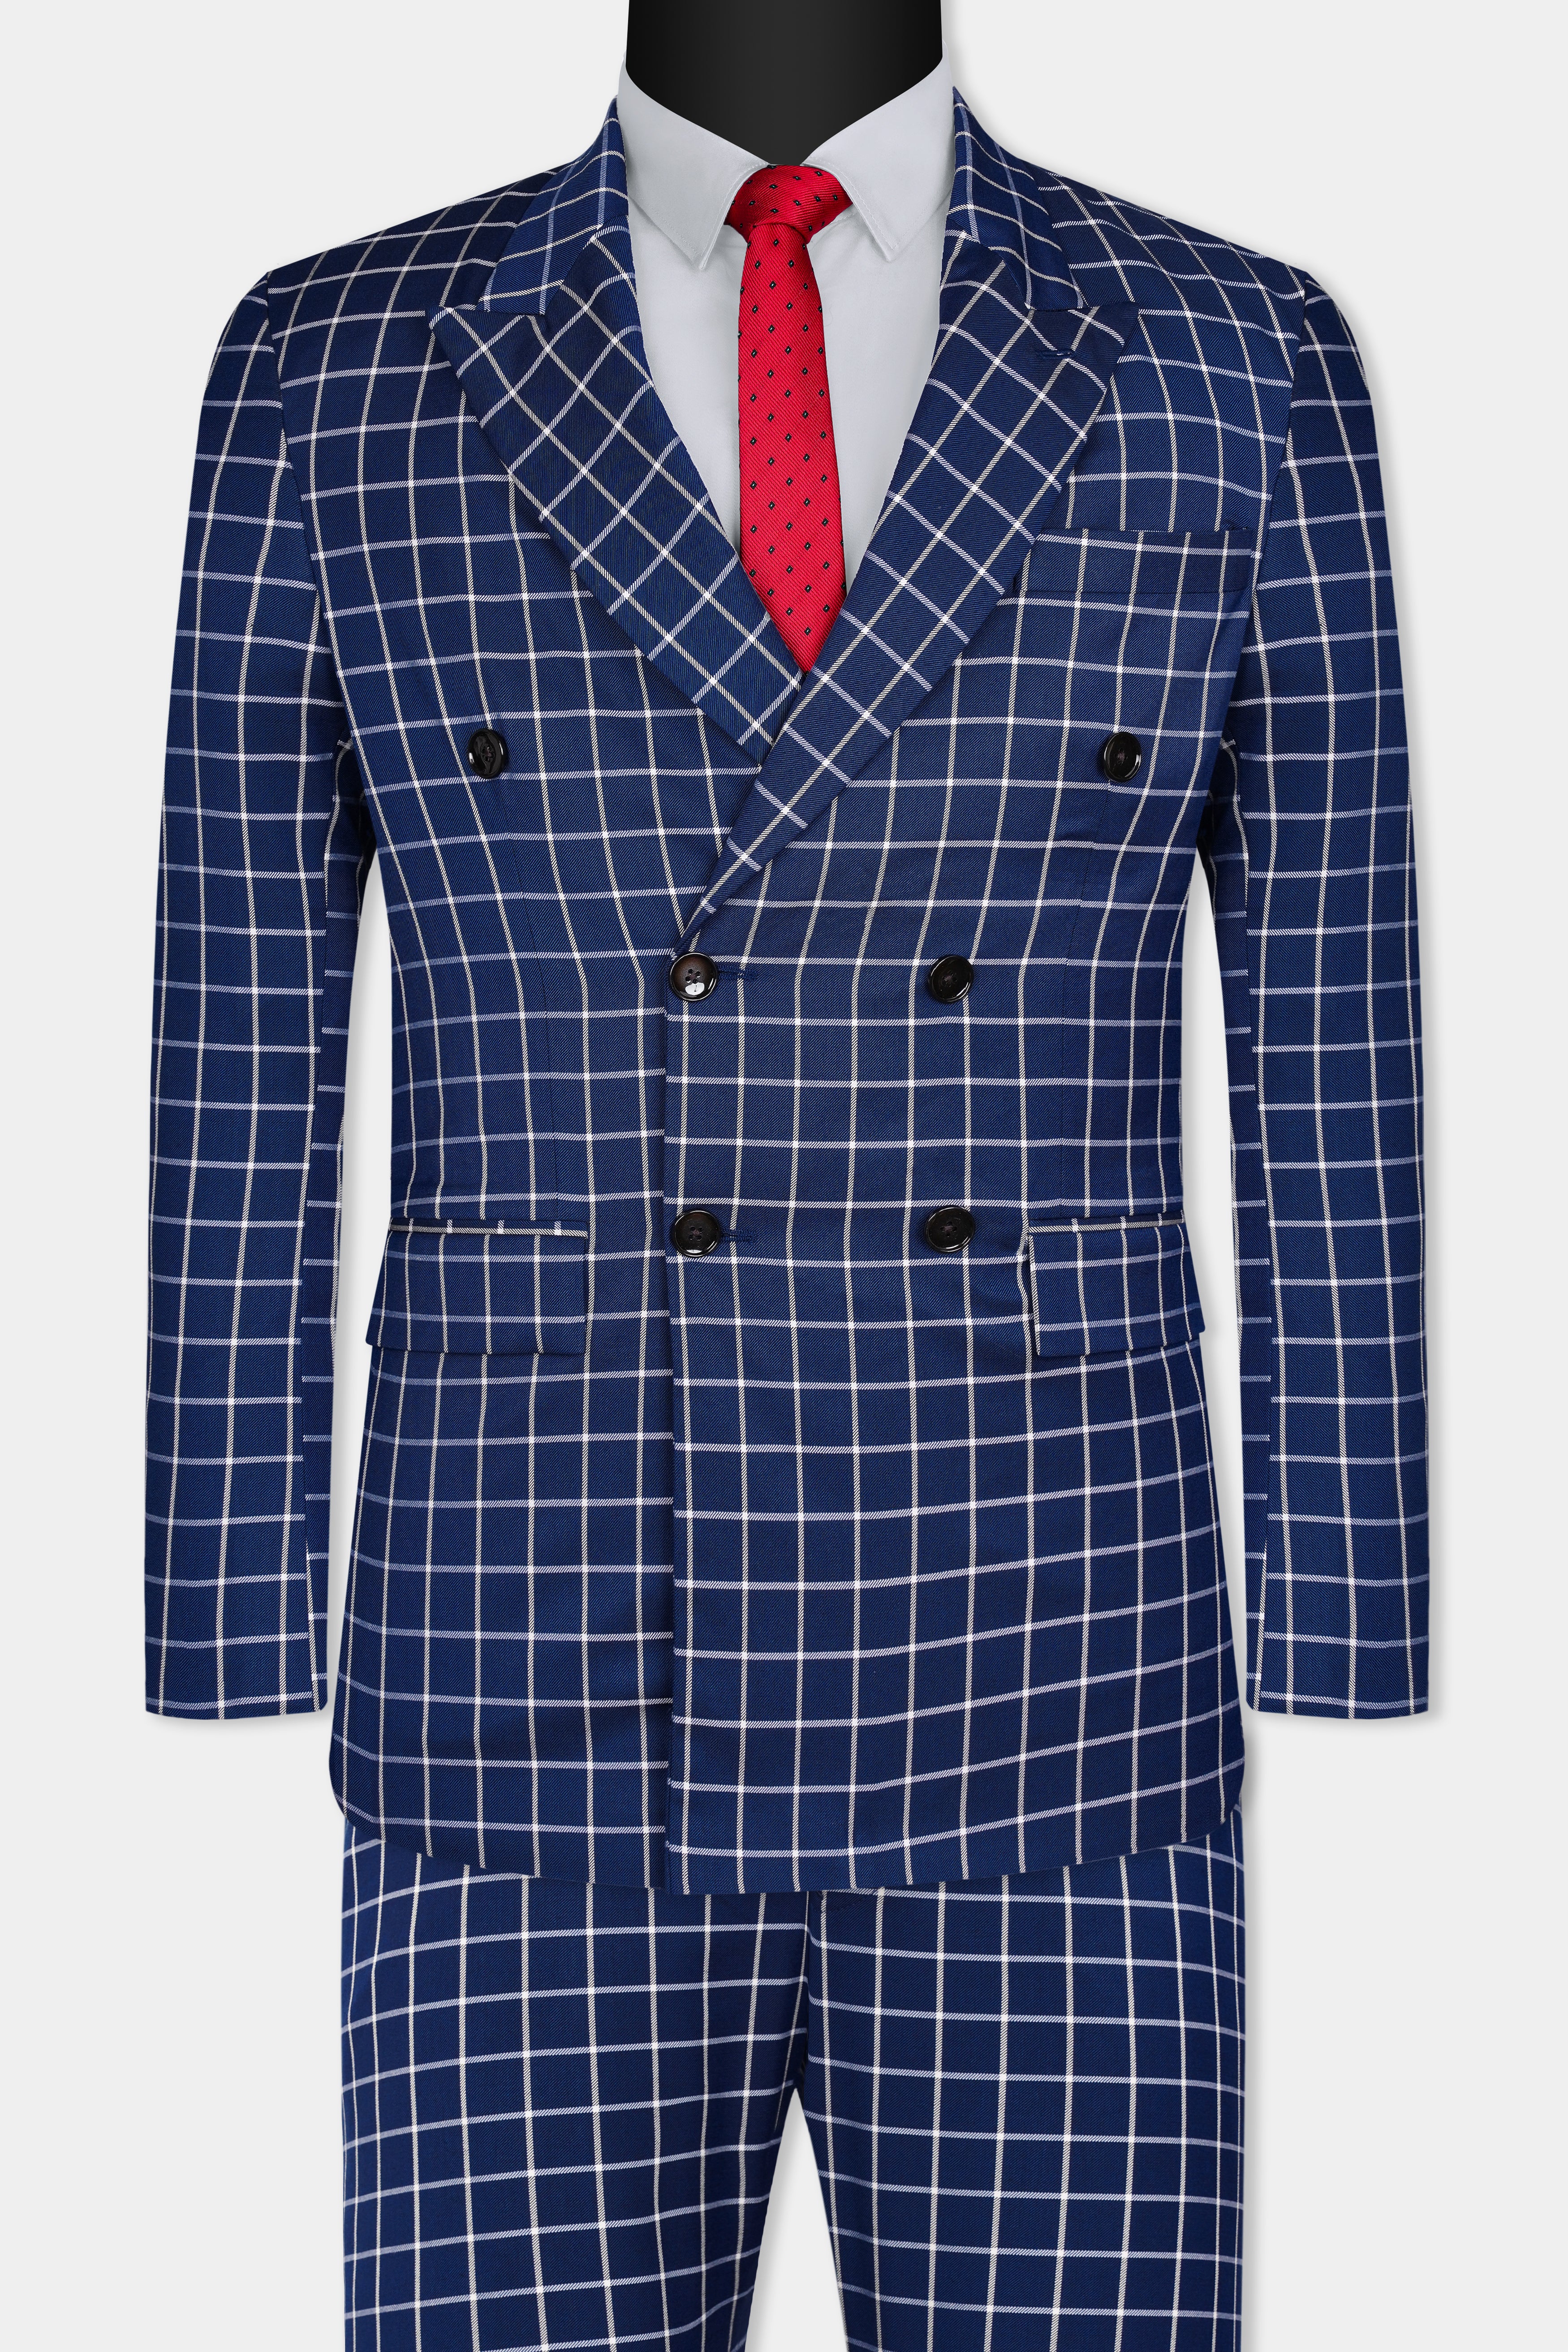 Marine Blue and White Windowpane Wool Rich Double Breasted Suit